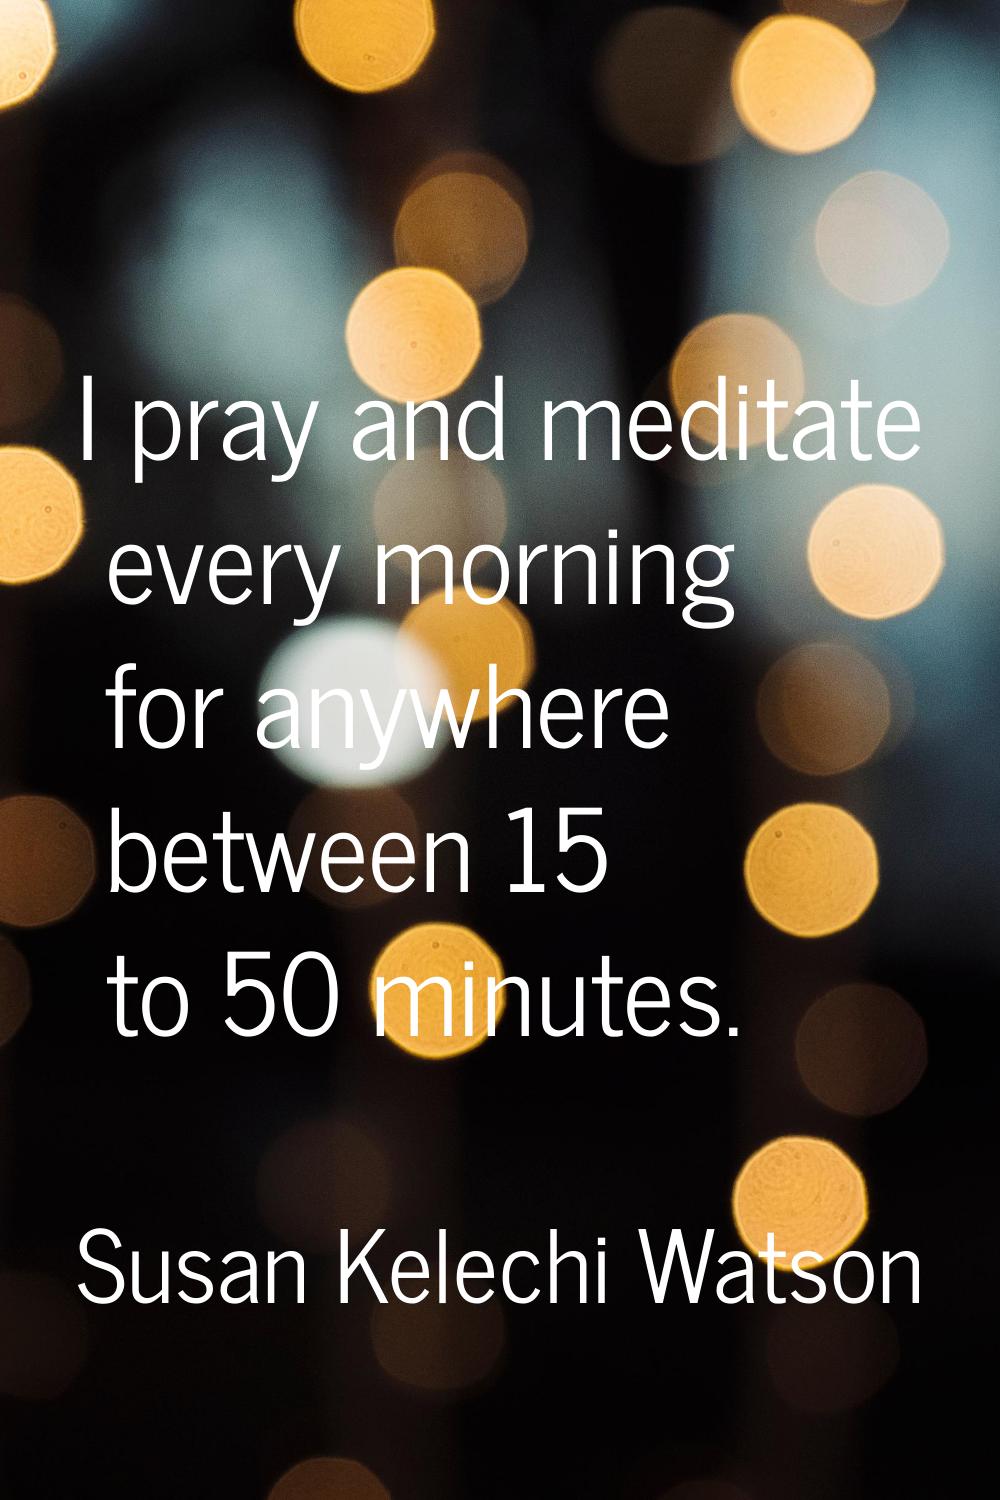 I pray and meditate every morning for anywhere between 15 to 50 minutes.